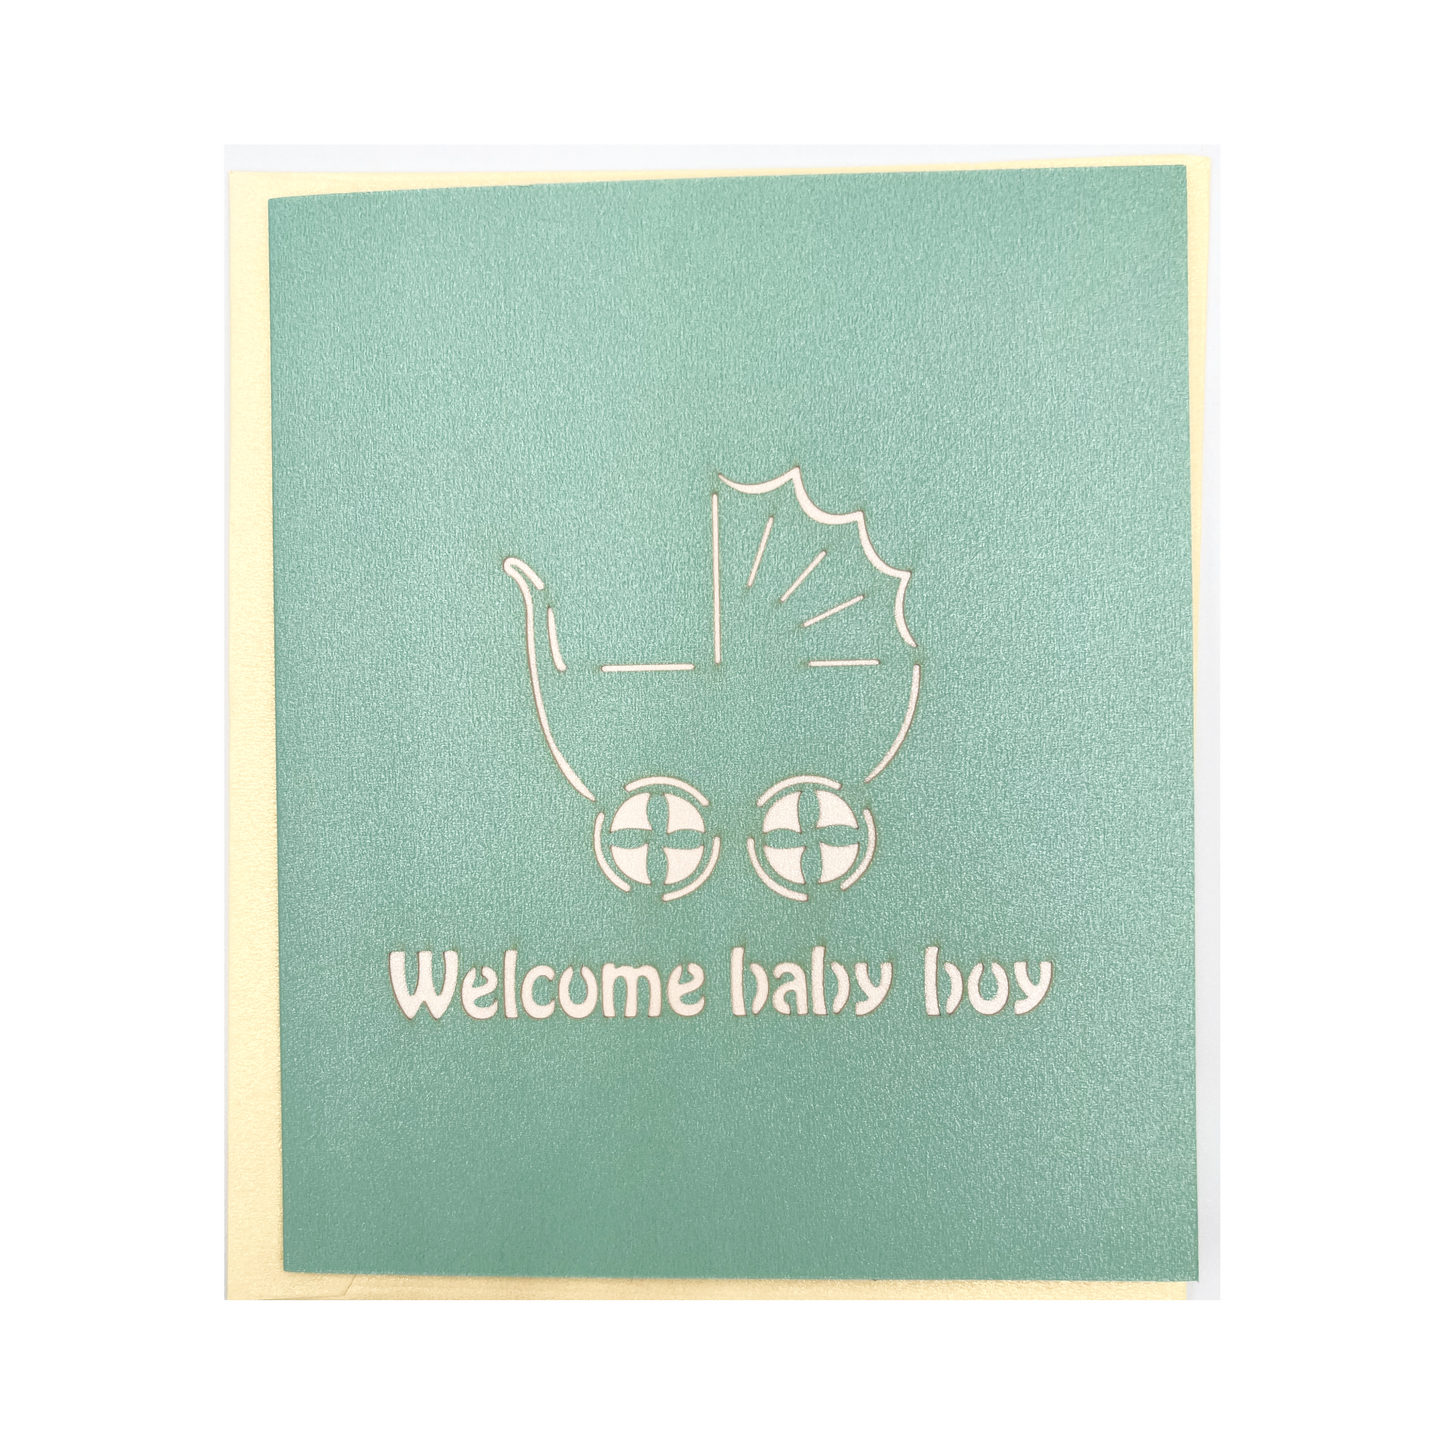 A1 - Welcome Baby Boy 3D Pop Up Greeting Card With Envelope